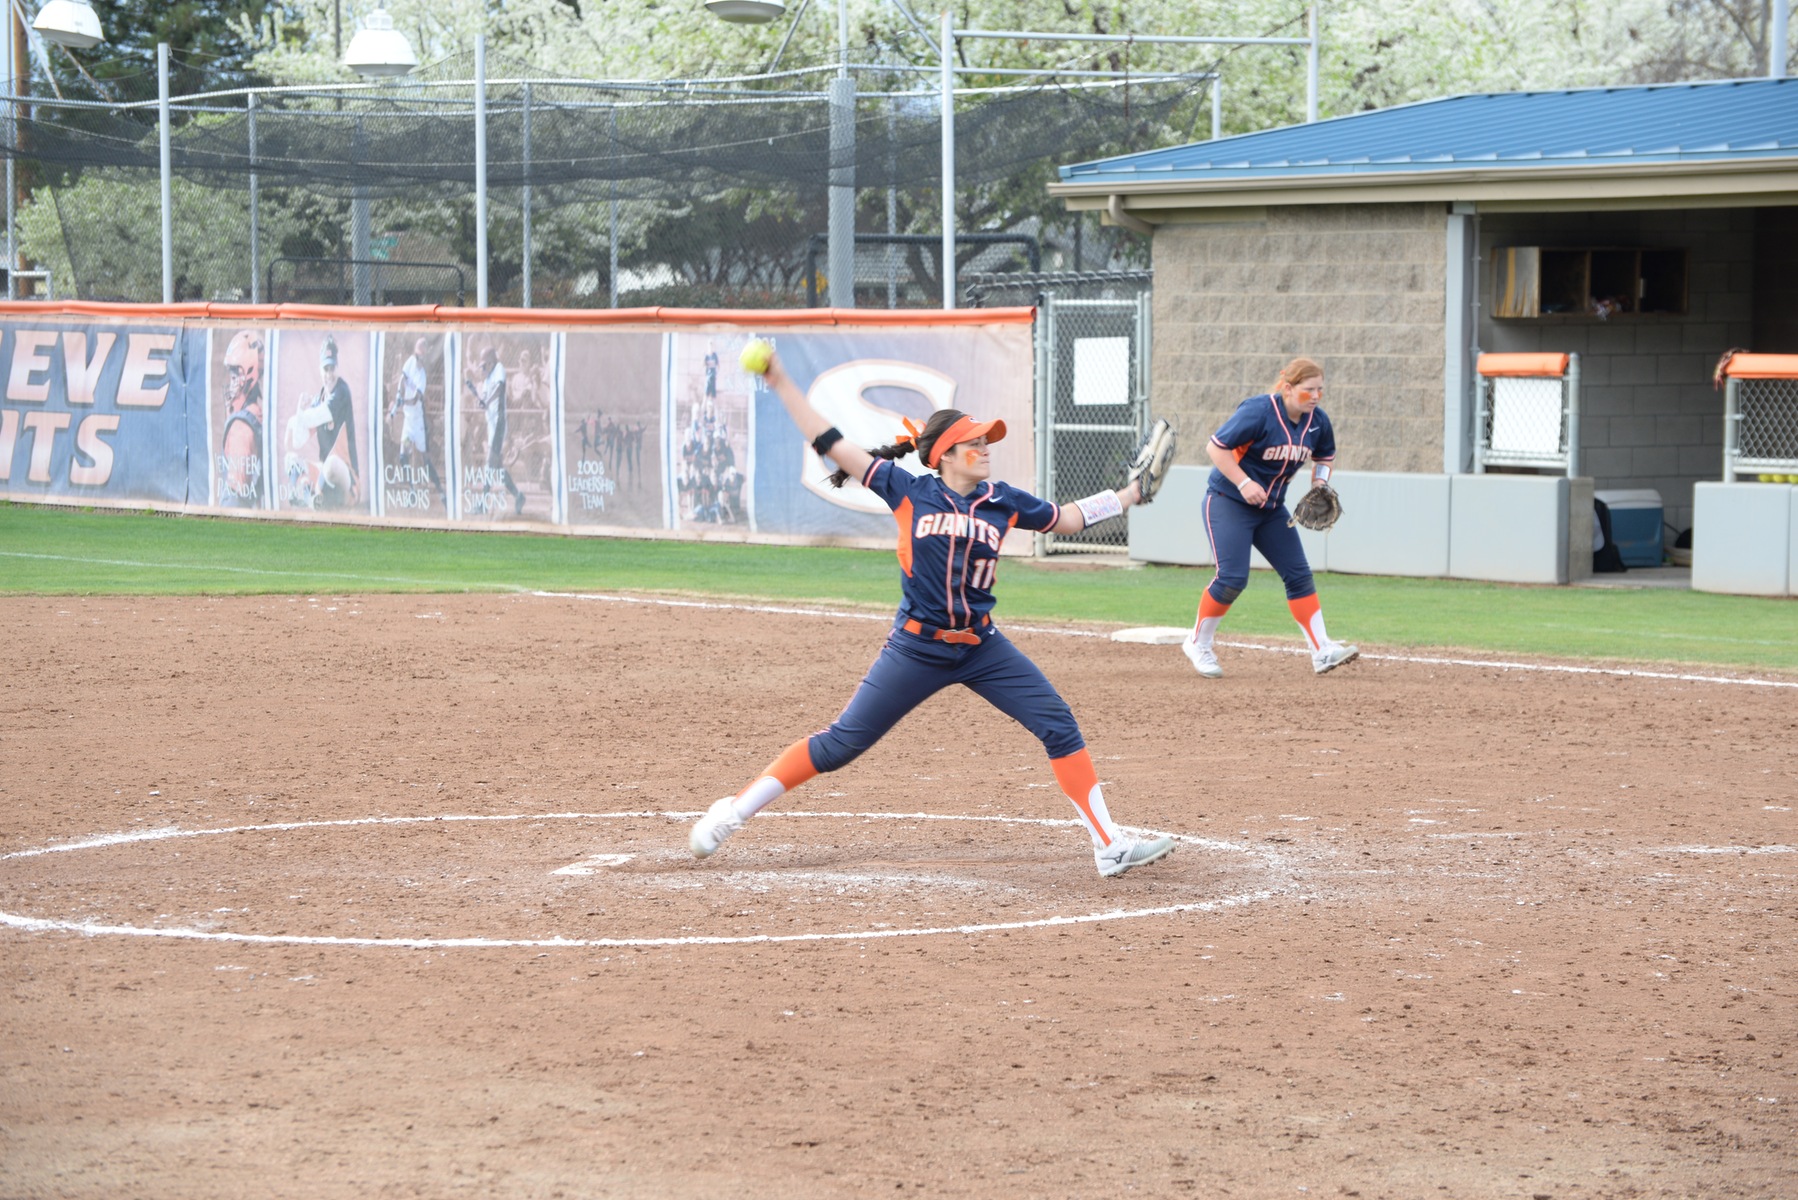 COS bounce back with a victory over West Hills